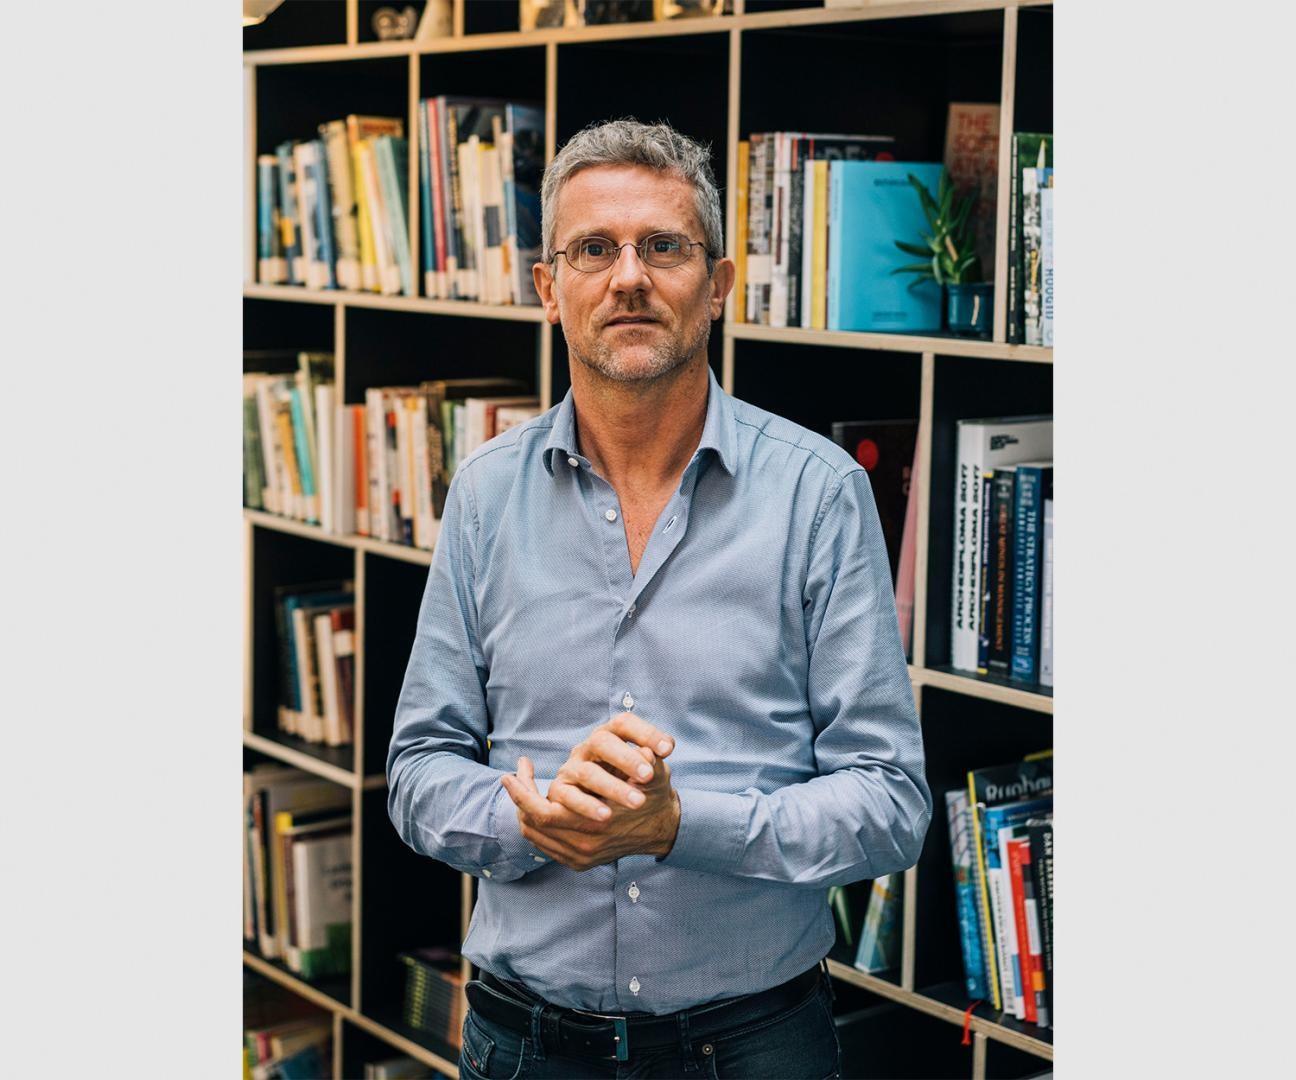 Carlo Ratti is a professor at MIT in Boston, where he heads the Senseable City Lab. In his function as a scientific partner